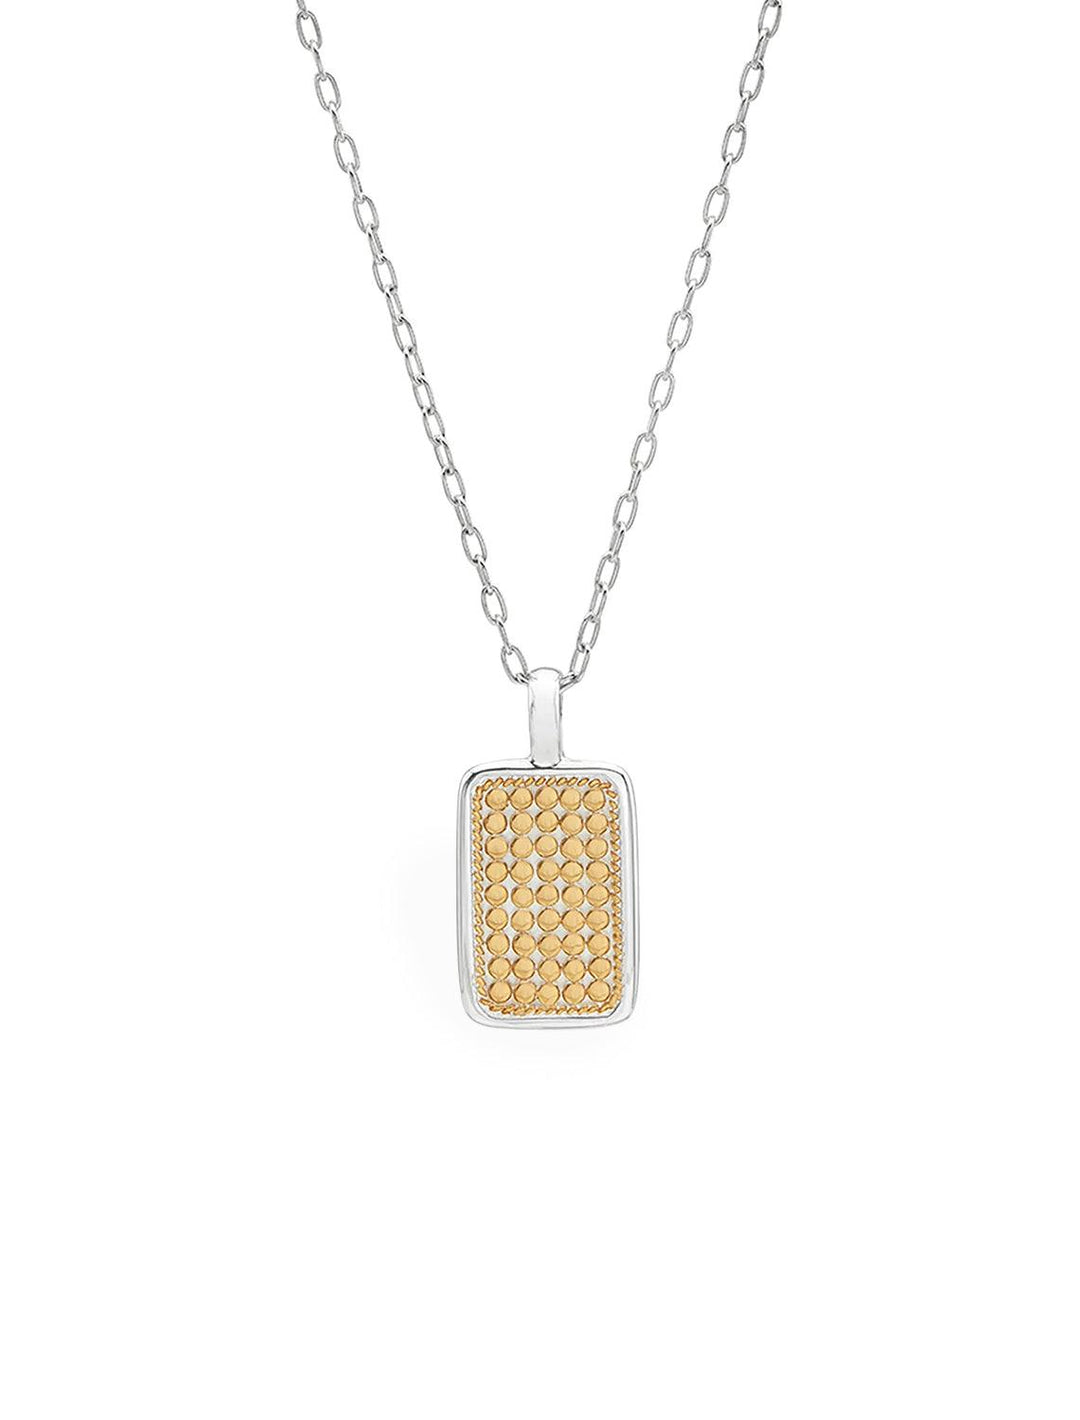 Front view of Anna Beck's Rectangular Engravable Necklace in Two Tone.